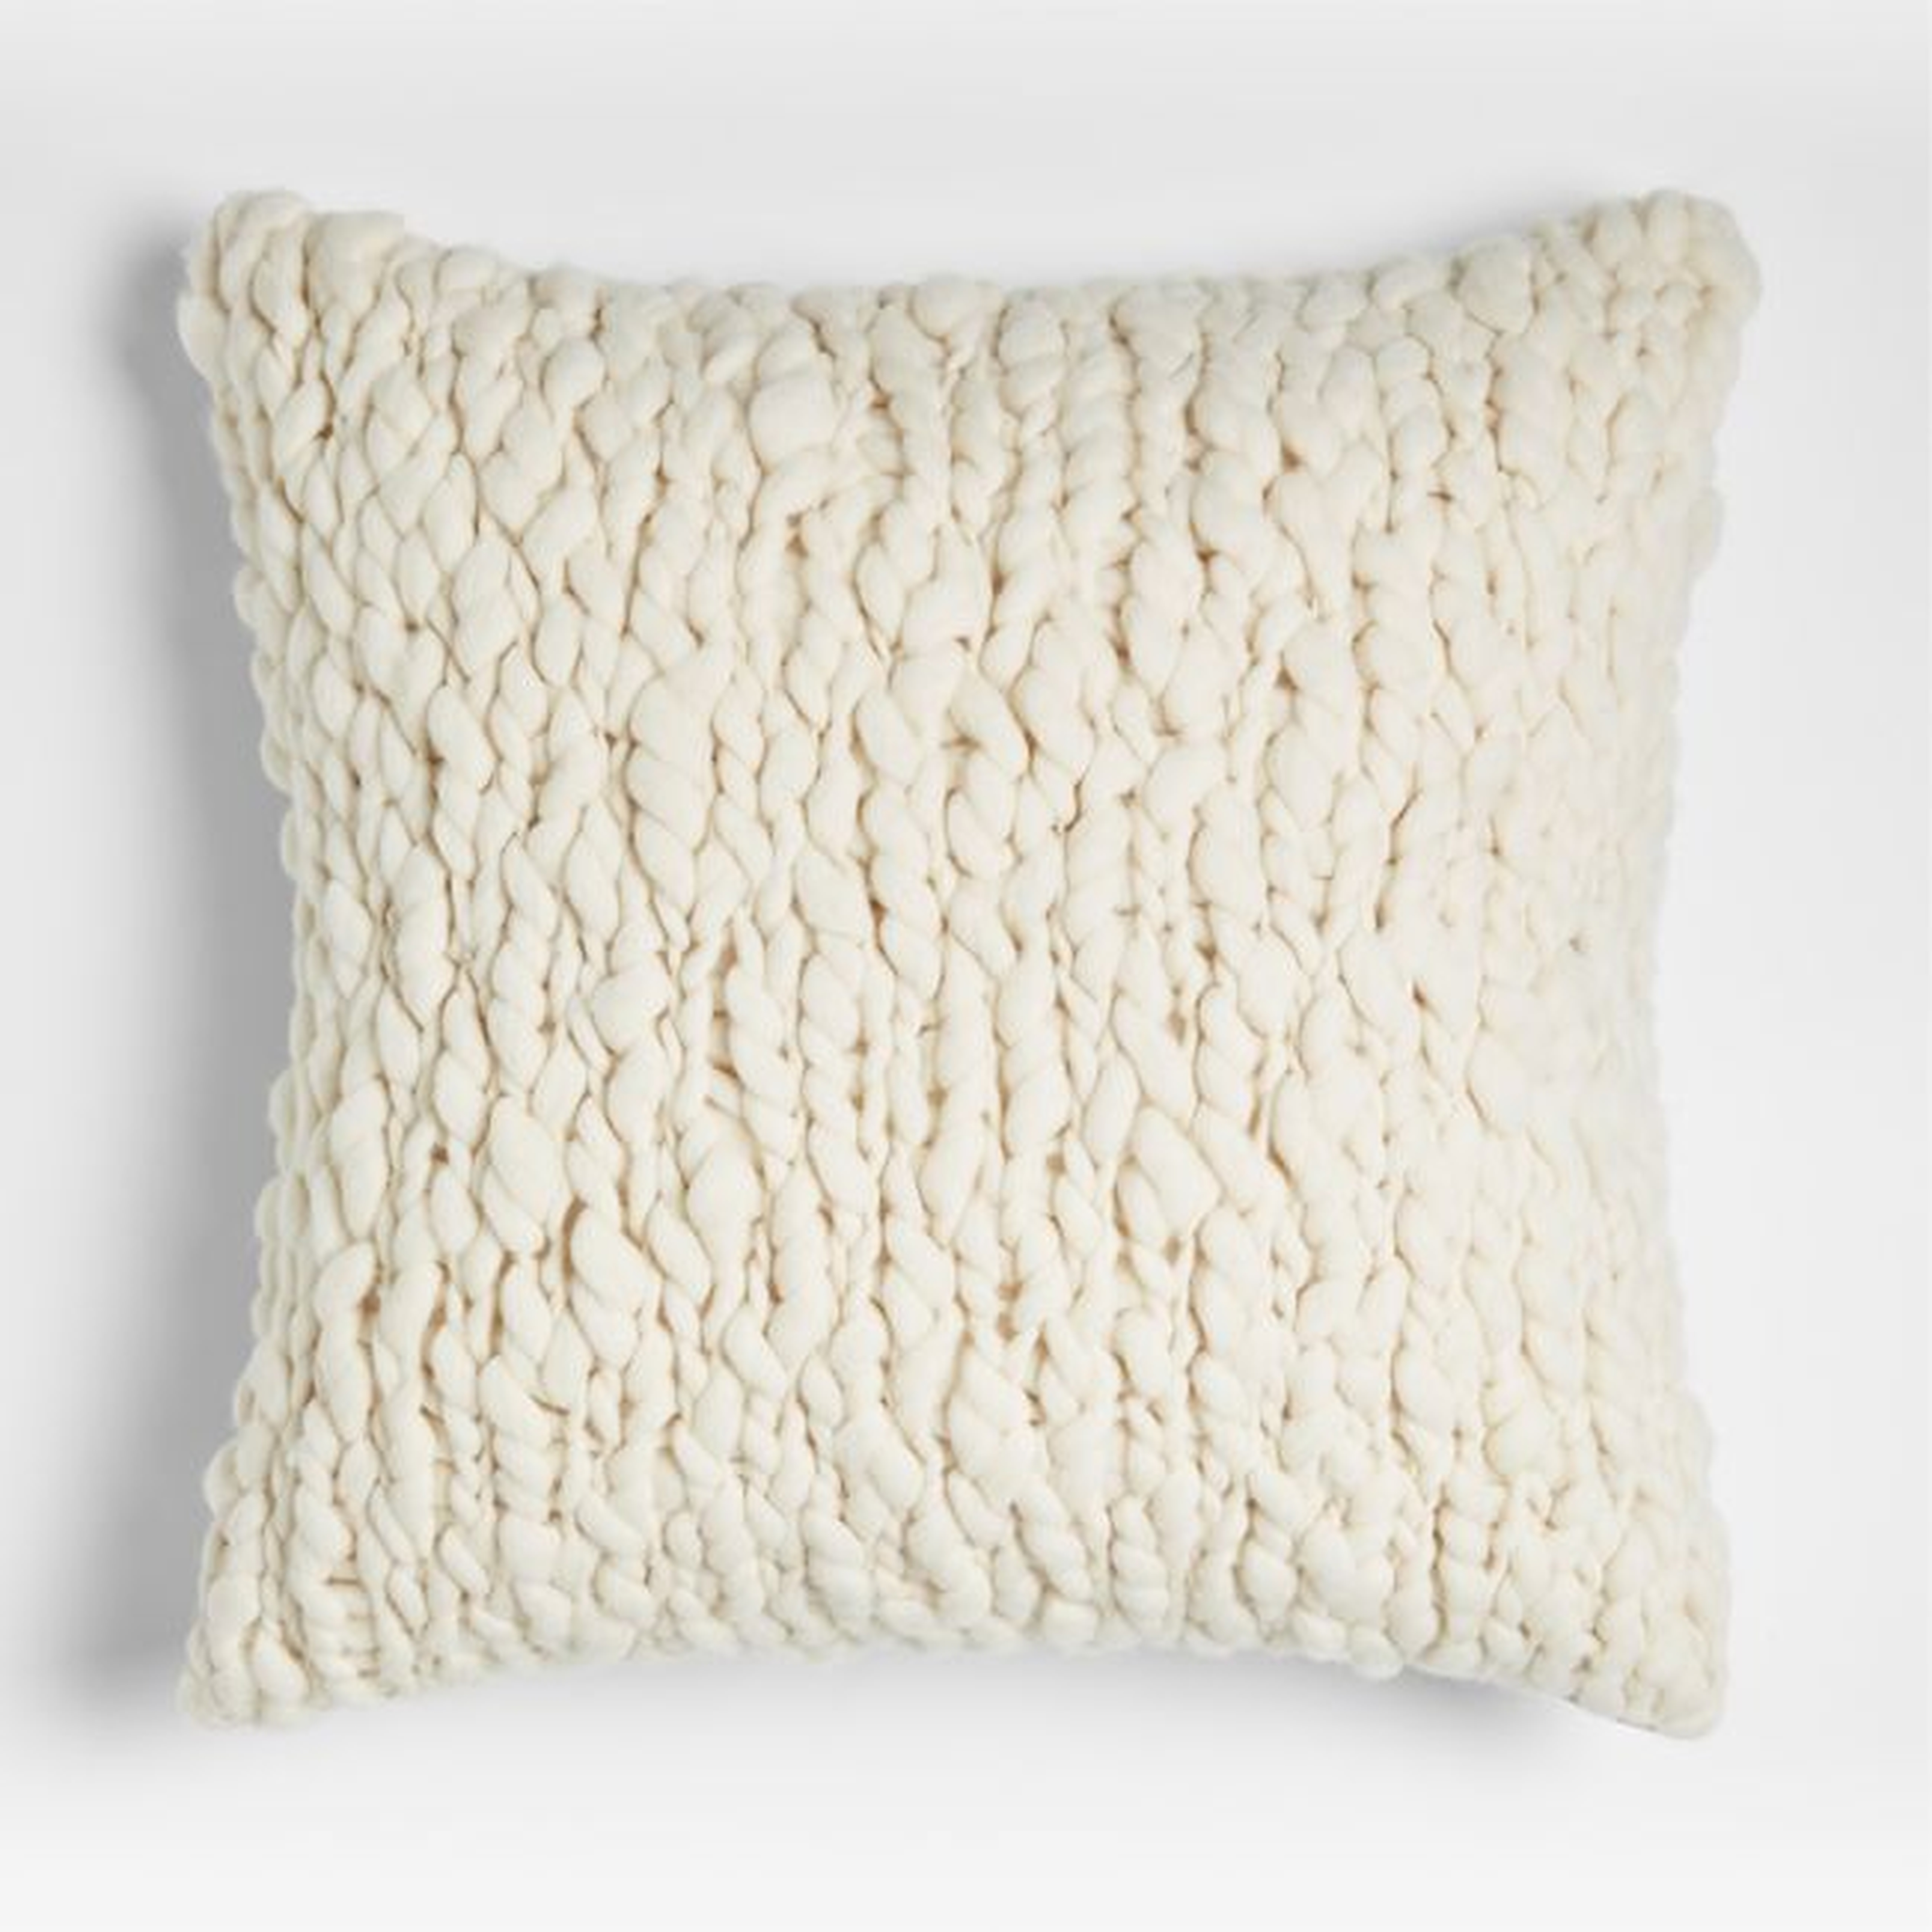 Chunky Knit 23" Cream Pillow Cover - Crate and Barrel